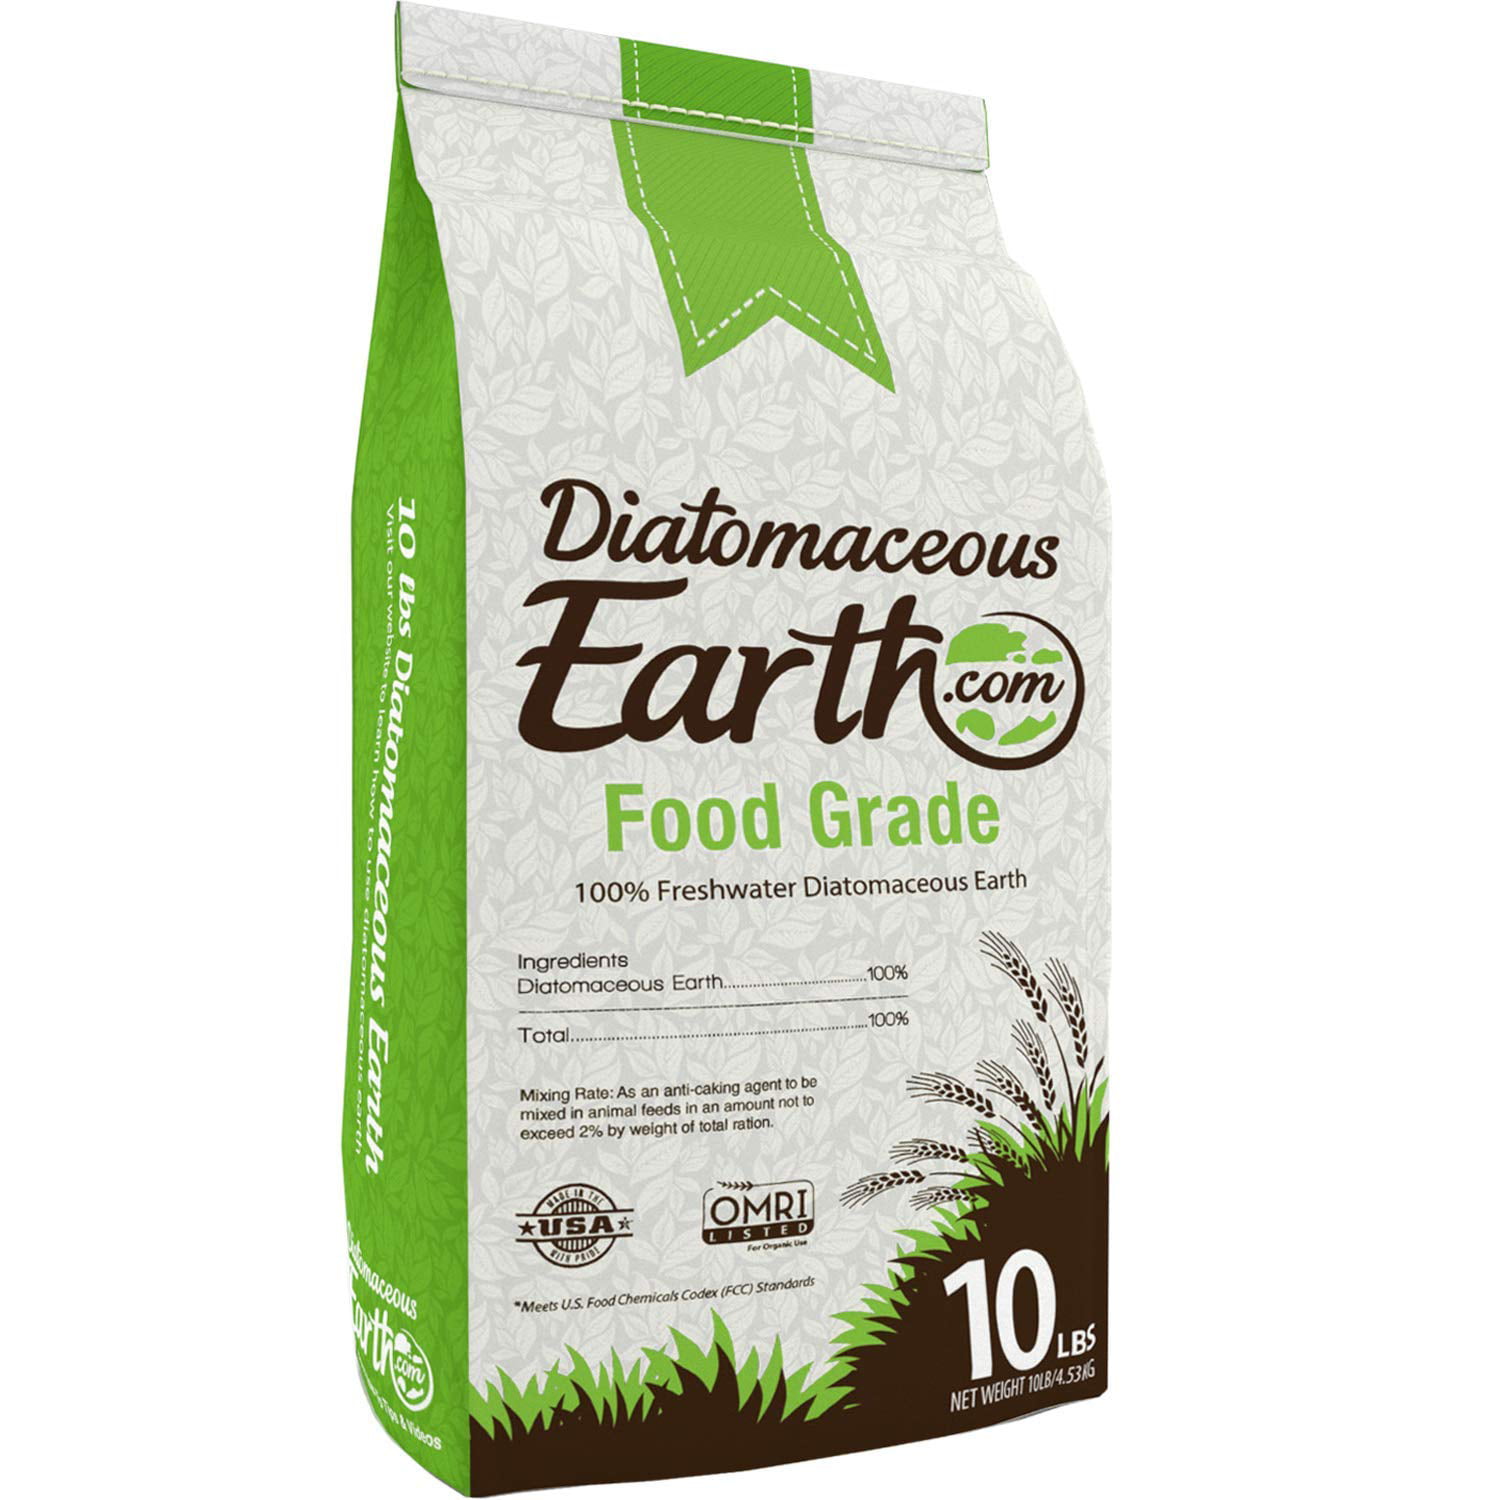 Diatomaceous Earth Food Grade 10 Lb Diatomaceous Earth You Can Trust Our Obsession To Create The Purest Food Grade Diatomaceous Earth Affects Every Aspect Of Our By Diatomaceousearth Walmart Com Walmart Com